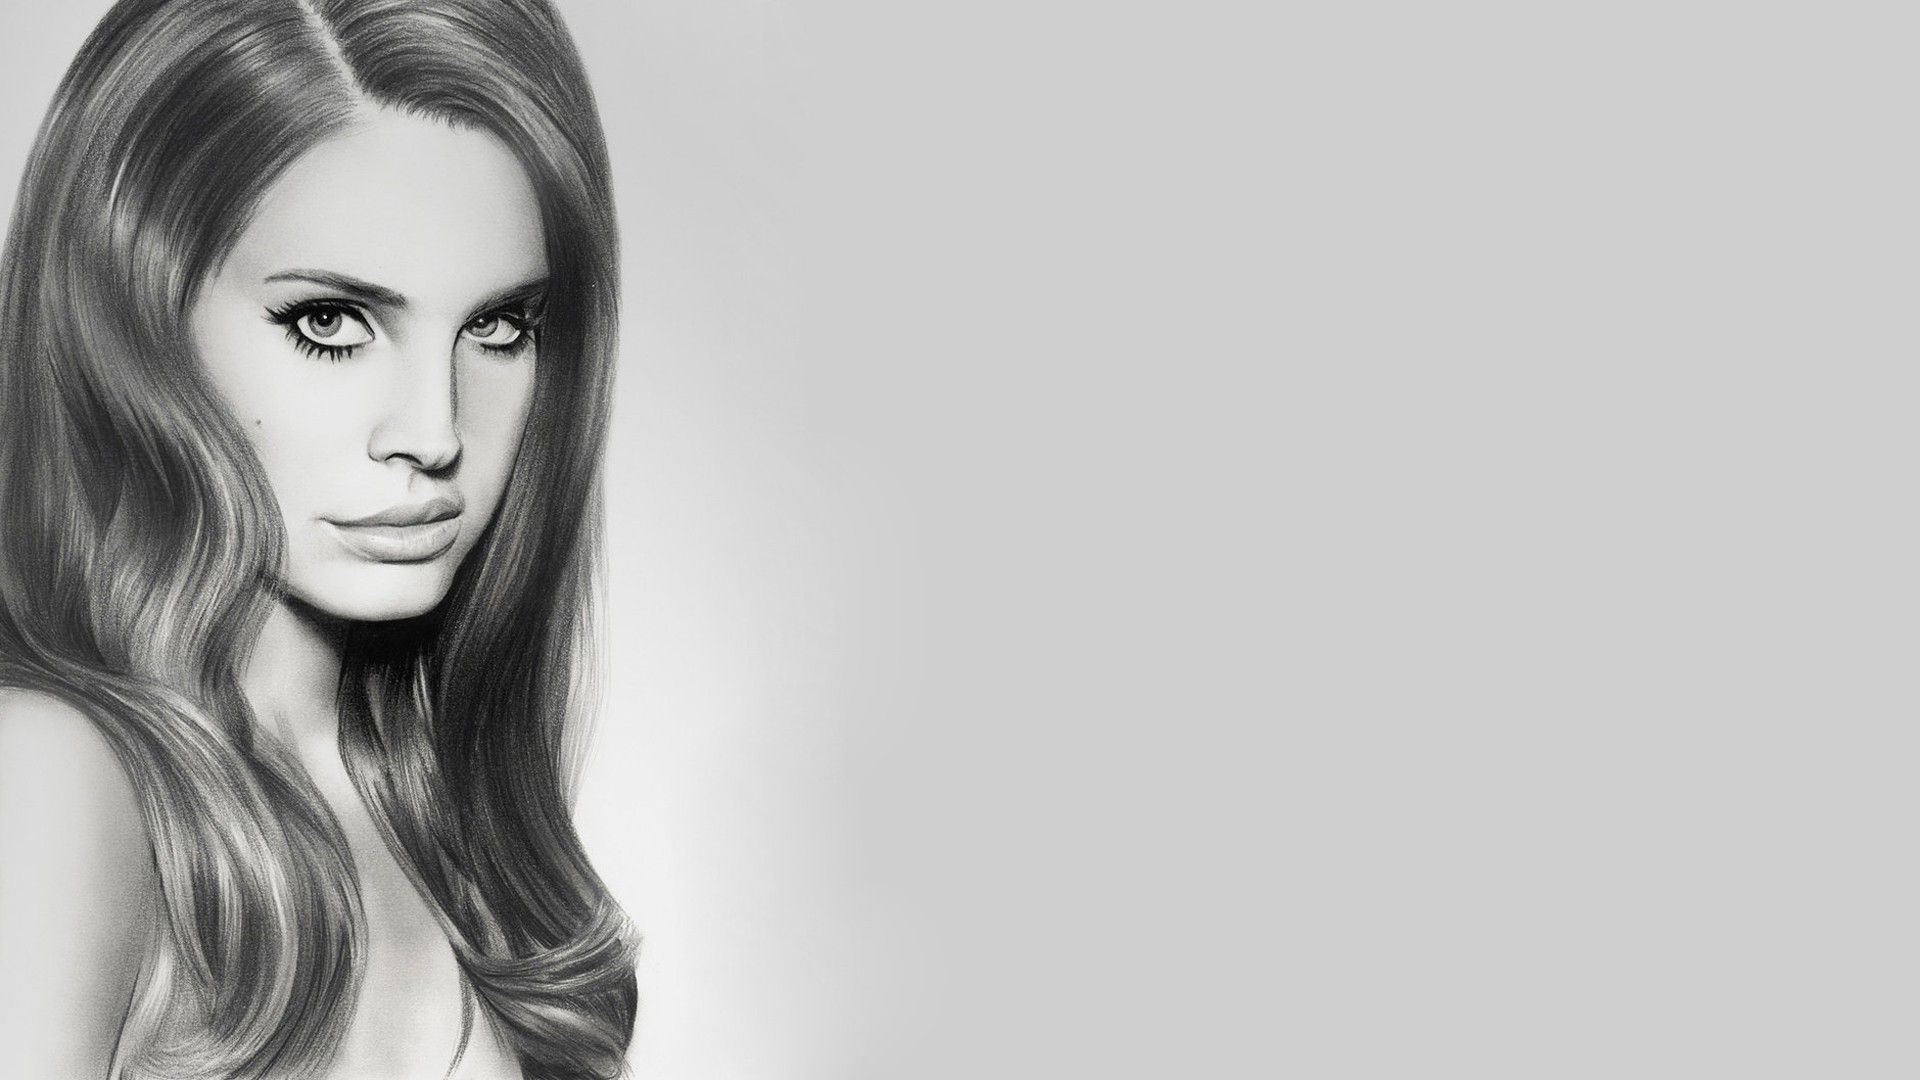 Angelina jolie wallpaper 1920x1080 for android 59+ - Lana Del Rey